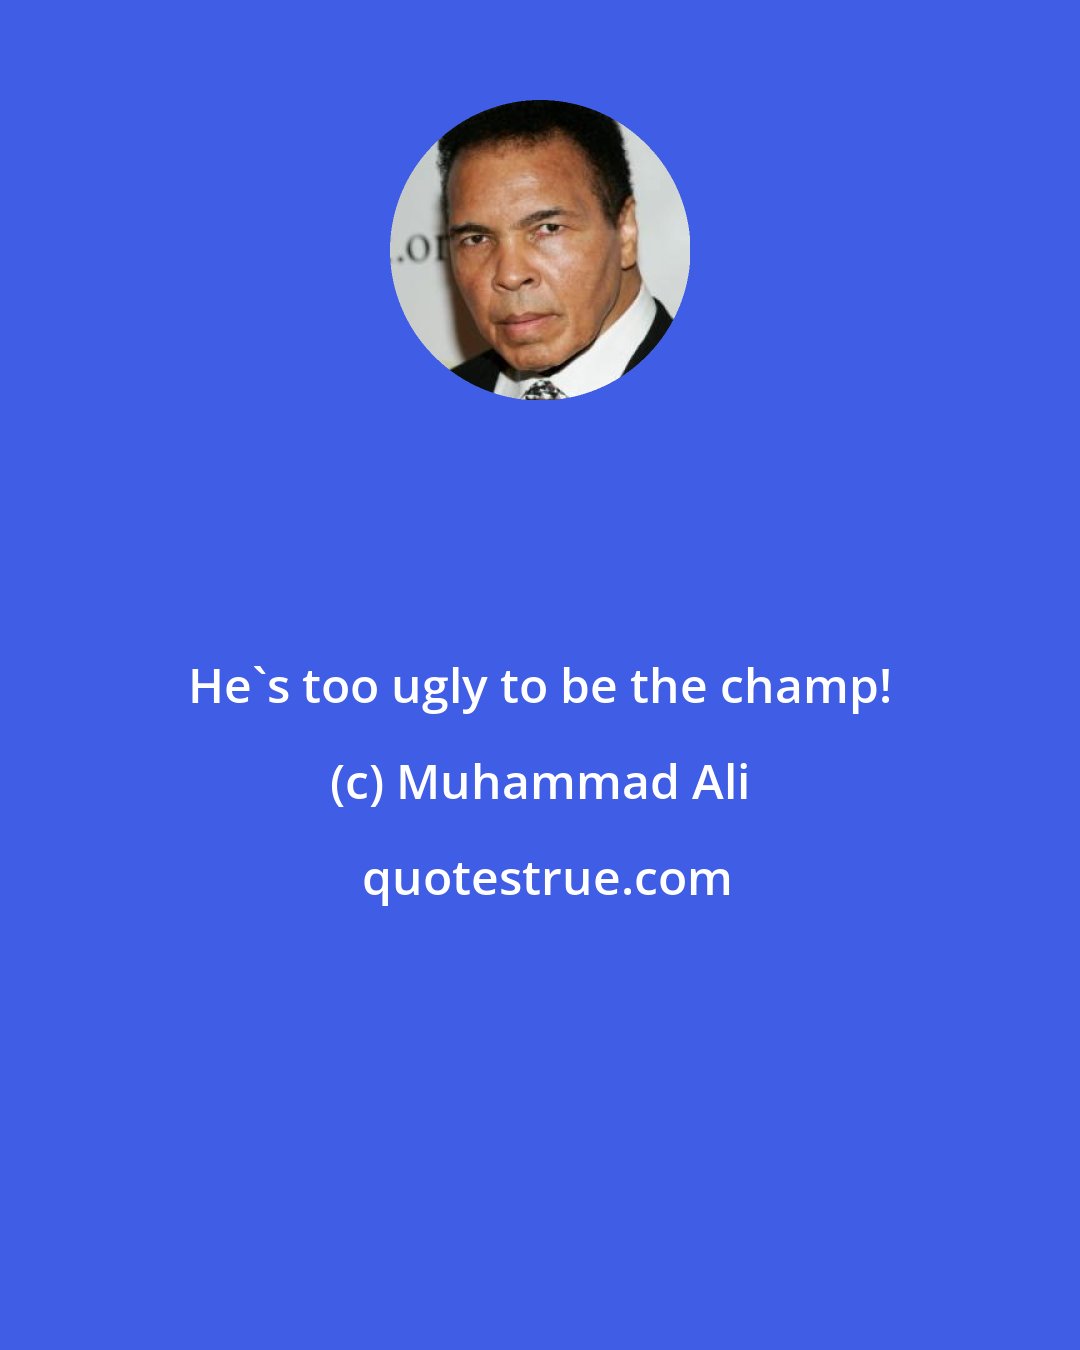 Muhammad Ali: He's too ugly to be the champ!